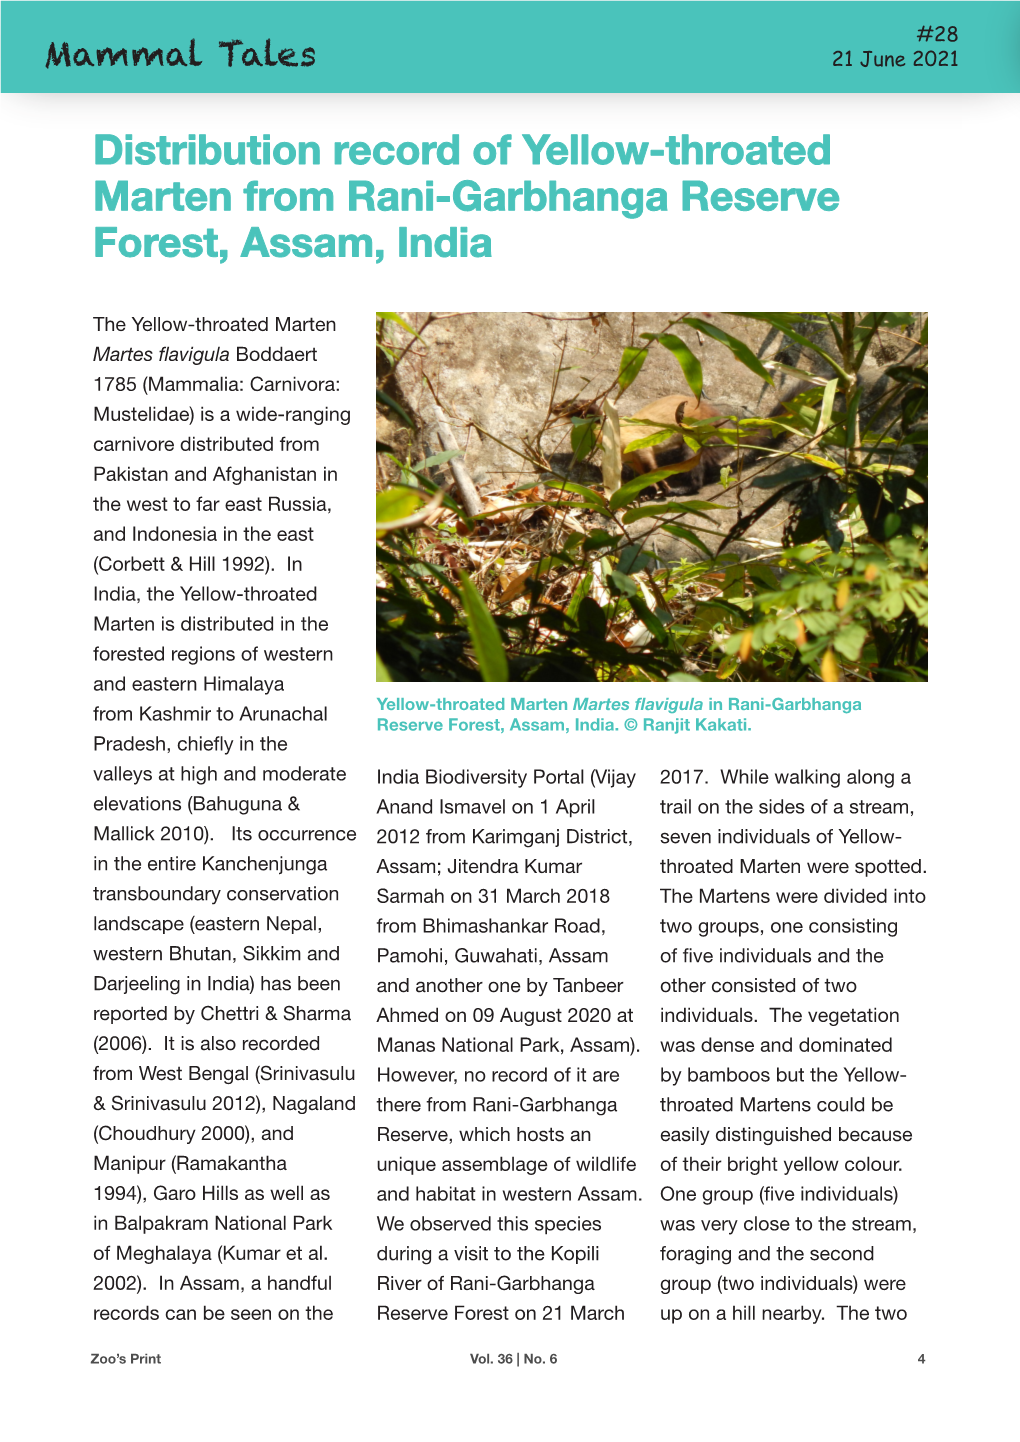 Distribution Record of Yellow-Throated Marten from Rani-Garbhanga Reserve Forest, Assam, India